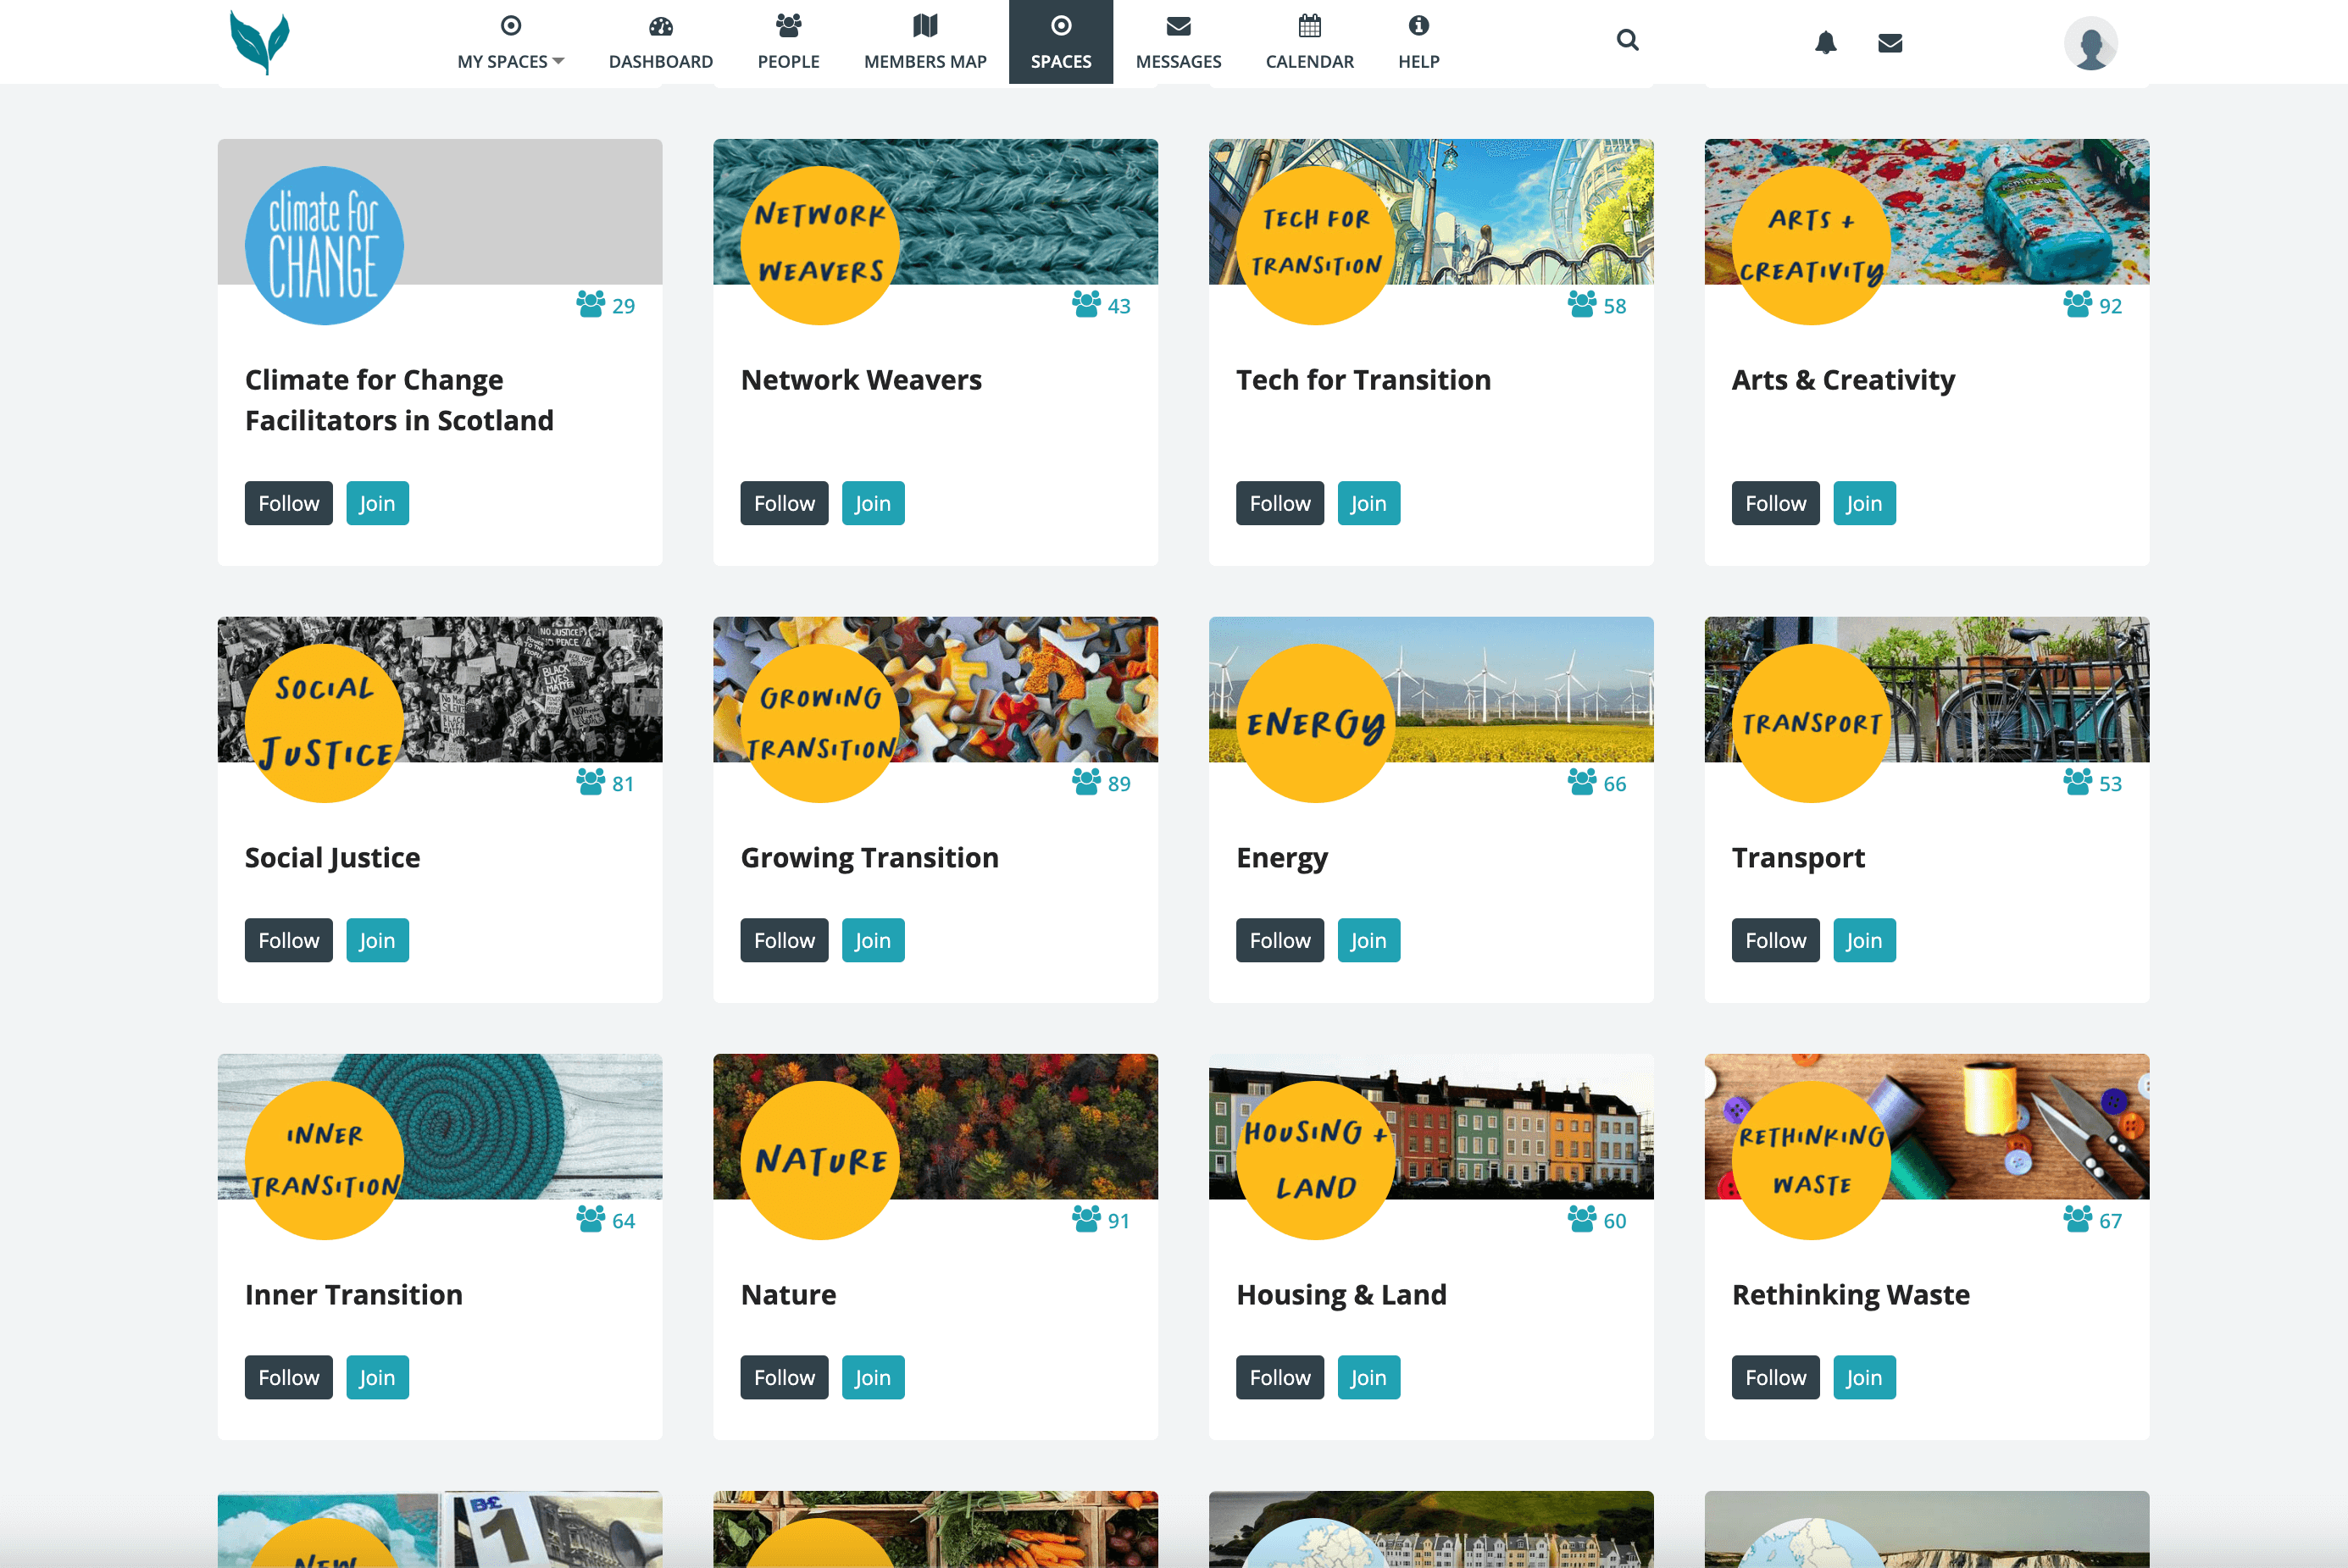 A screenshot of the Vive platform, showing a list of themed spaces, including food, new economy, nature and Inner Transition.